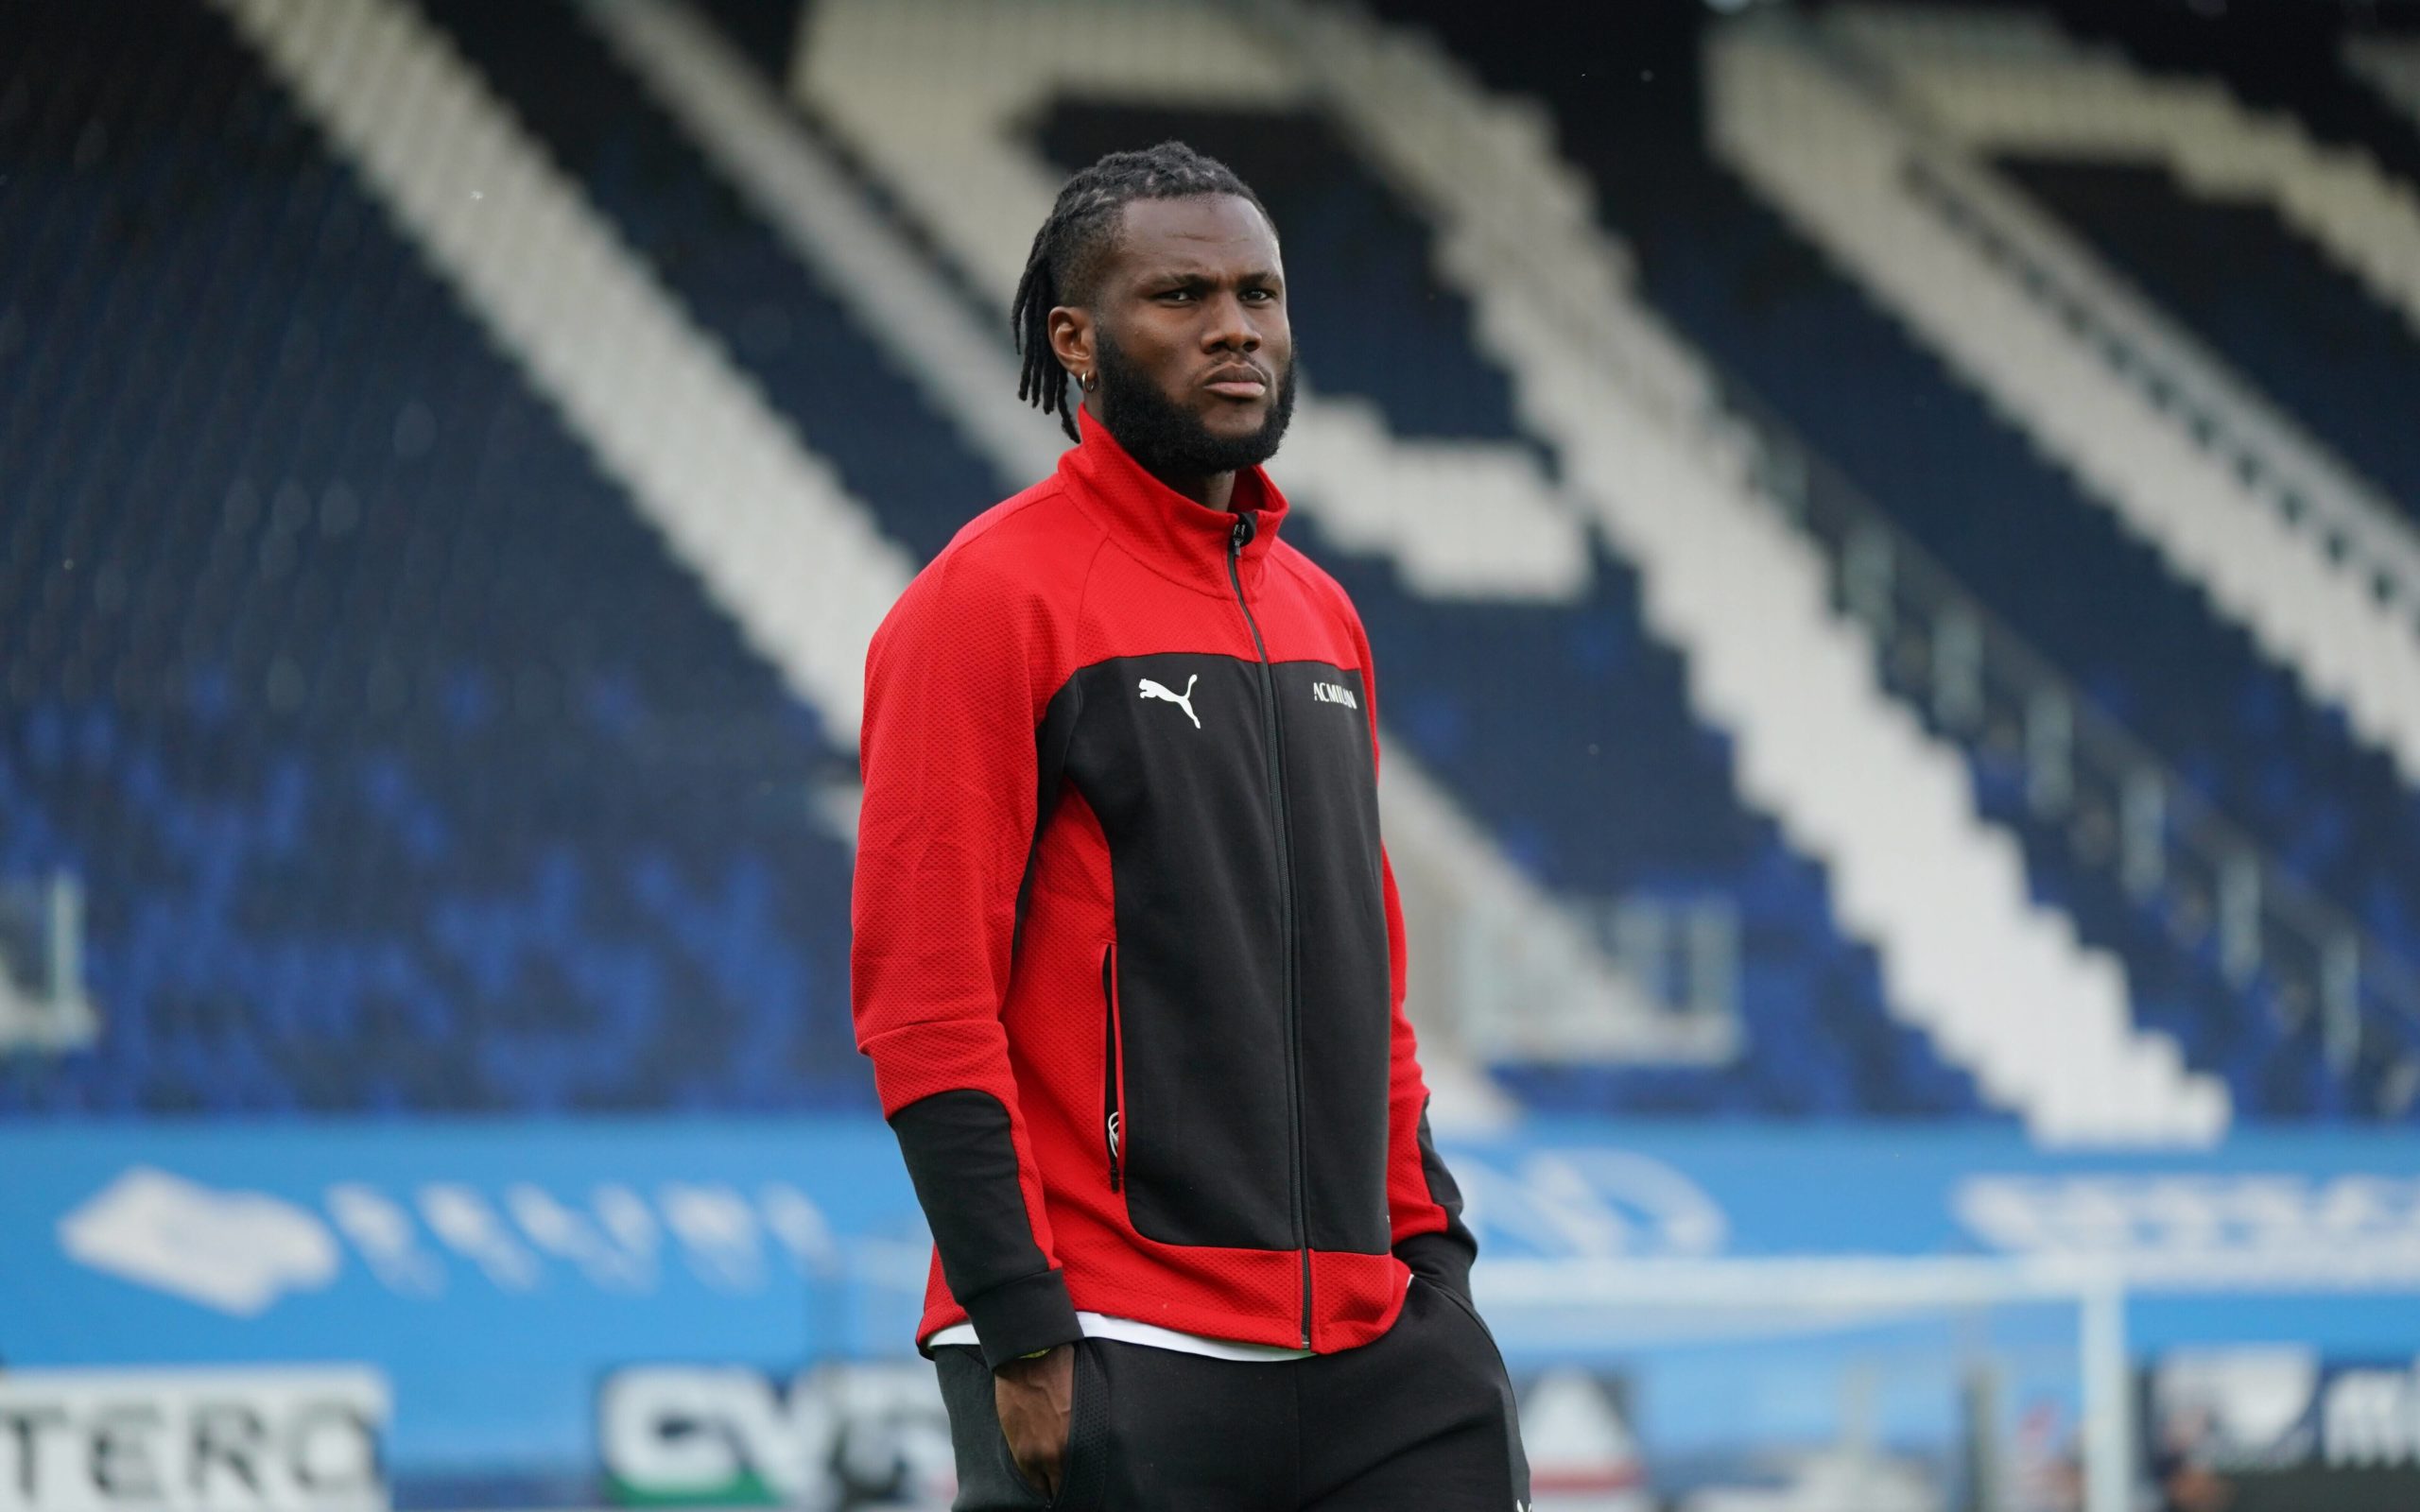 Liverpool have set their sights on Kessie who is seen in the picture